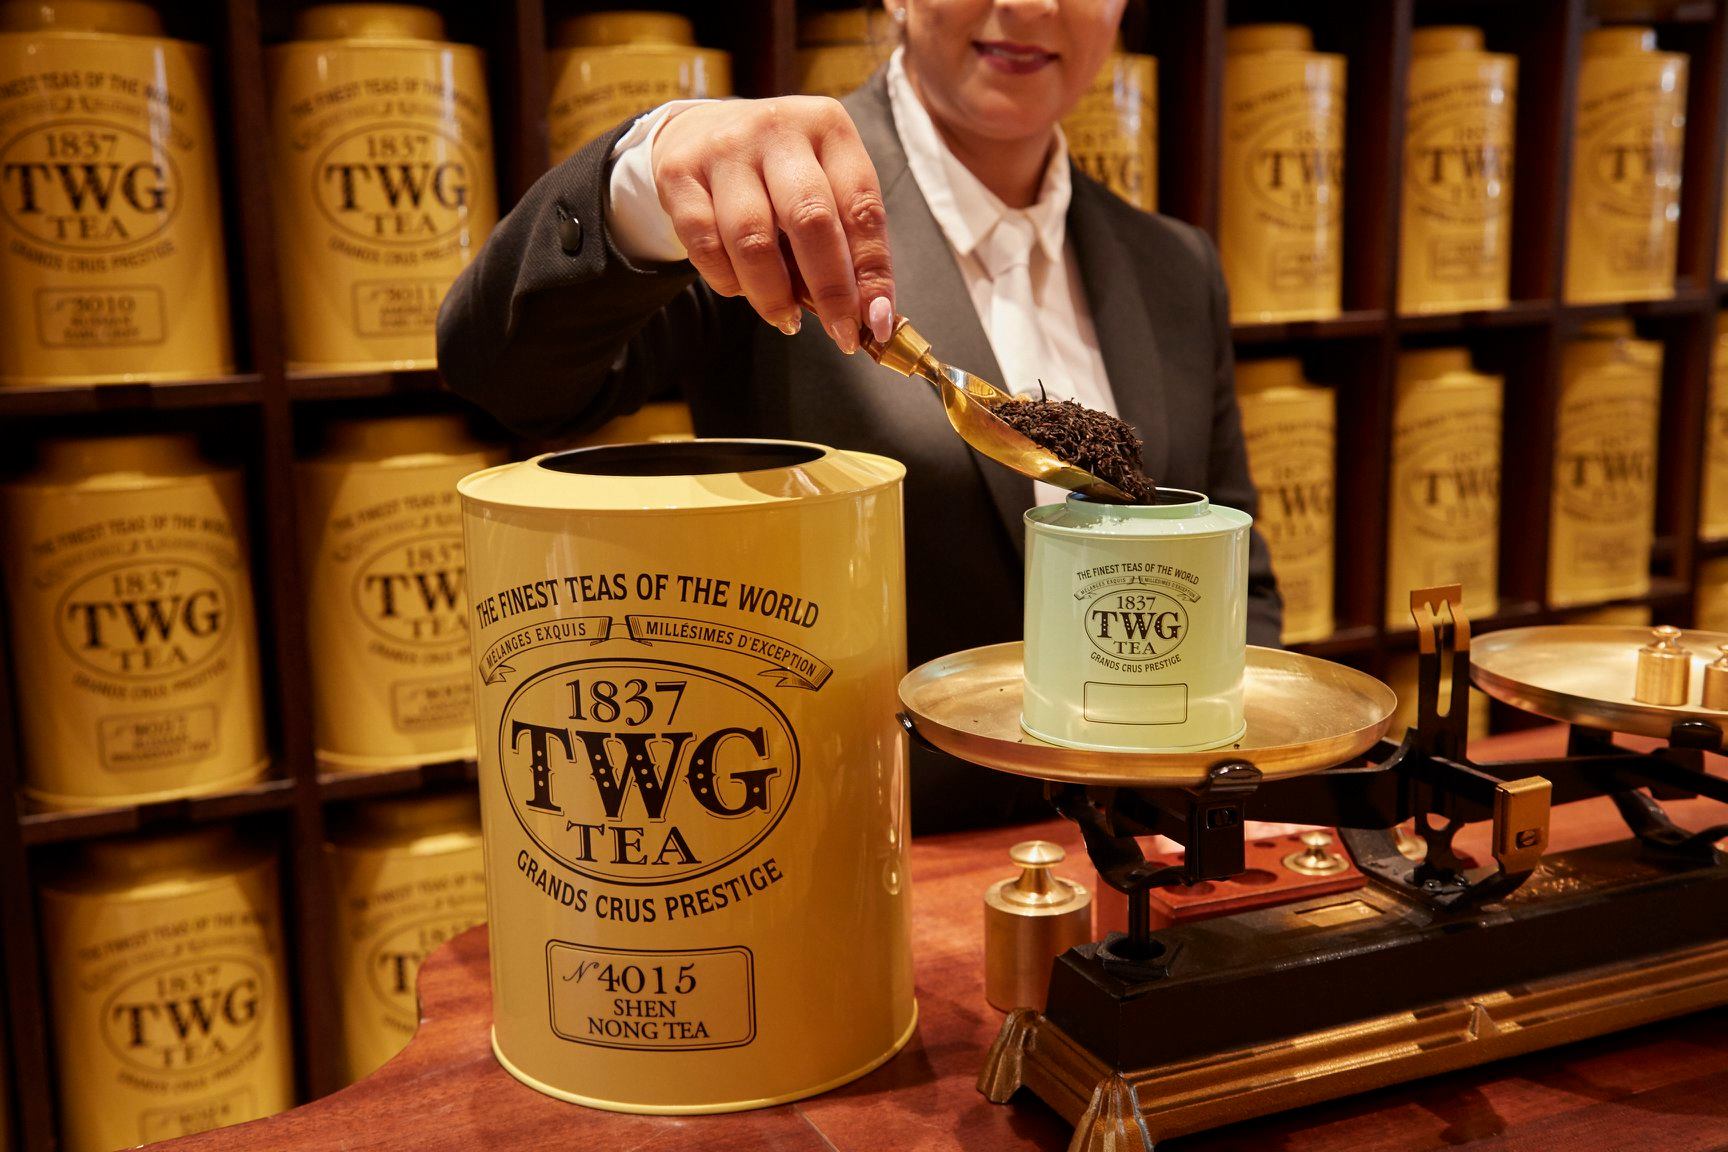 #NowInfusing: A tribute to the mythical Emperor Shen Nong who is said to have introduced tea to China, this warm black tea infuses into a flavourful cup with a hint of refreshing sweetness. Shop now at TWGTea.Com.